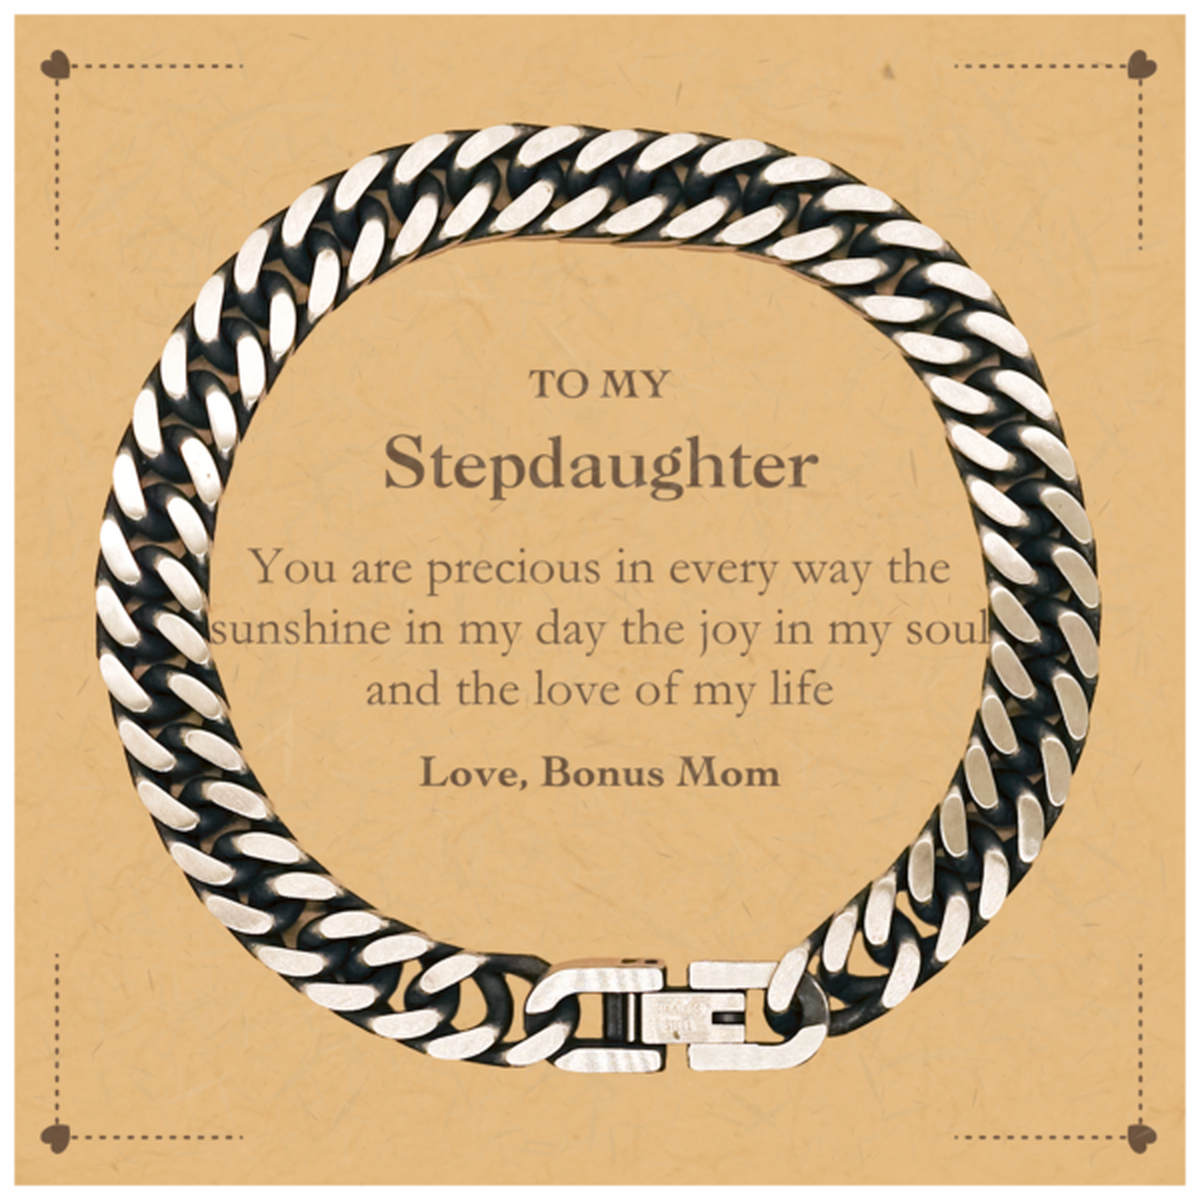 Graduation Gifts for Stepdaughter Cuban Link Chain Bracelet Present from Bonus Mom, Christmas Stepdaughter Birthday Gifts Stepdaughter You are precious in every way the sunshine in my day. Love, Bonus Mom